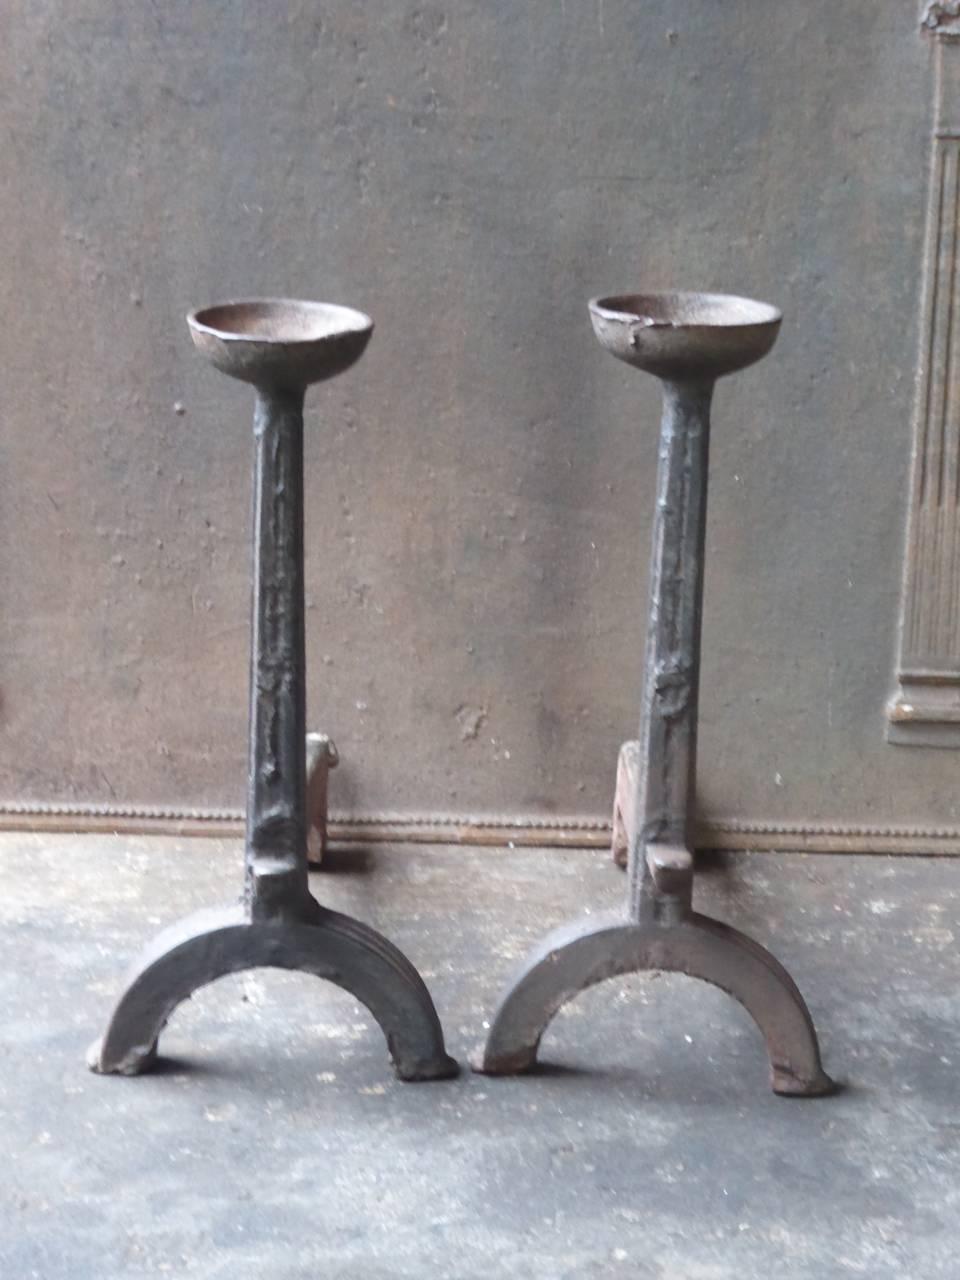 17th century French Gothic fire dogs made of cast iron. This type of andirons are also called cup dogs. The condition is good.

